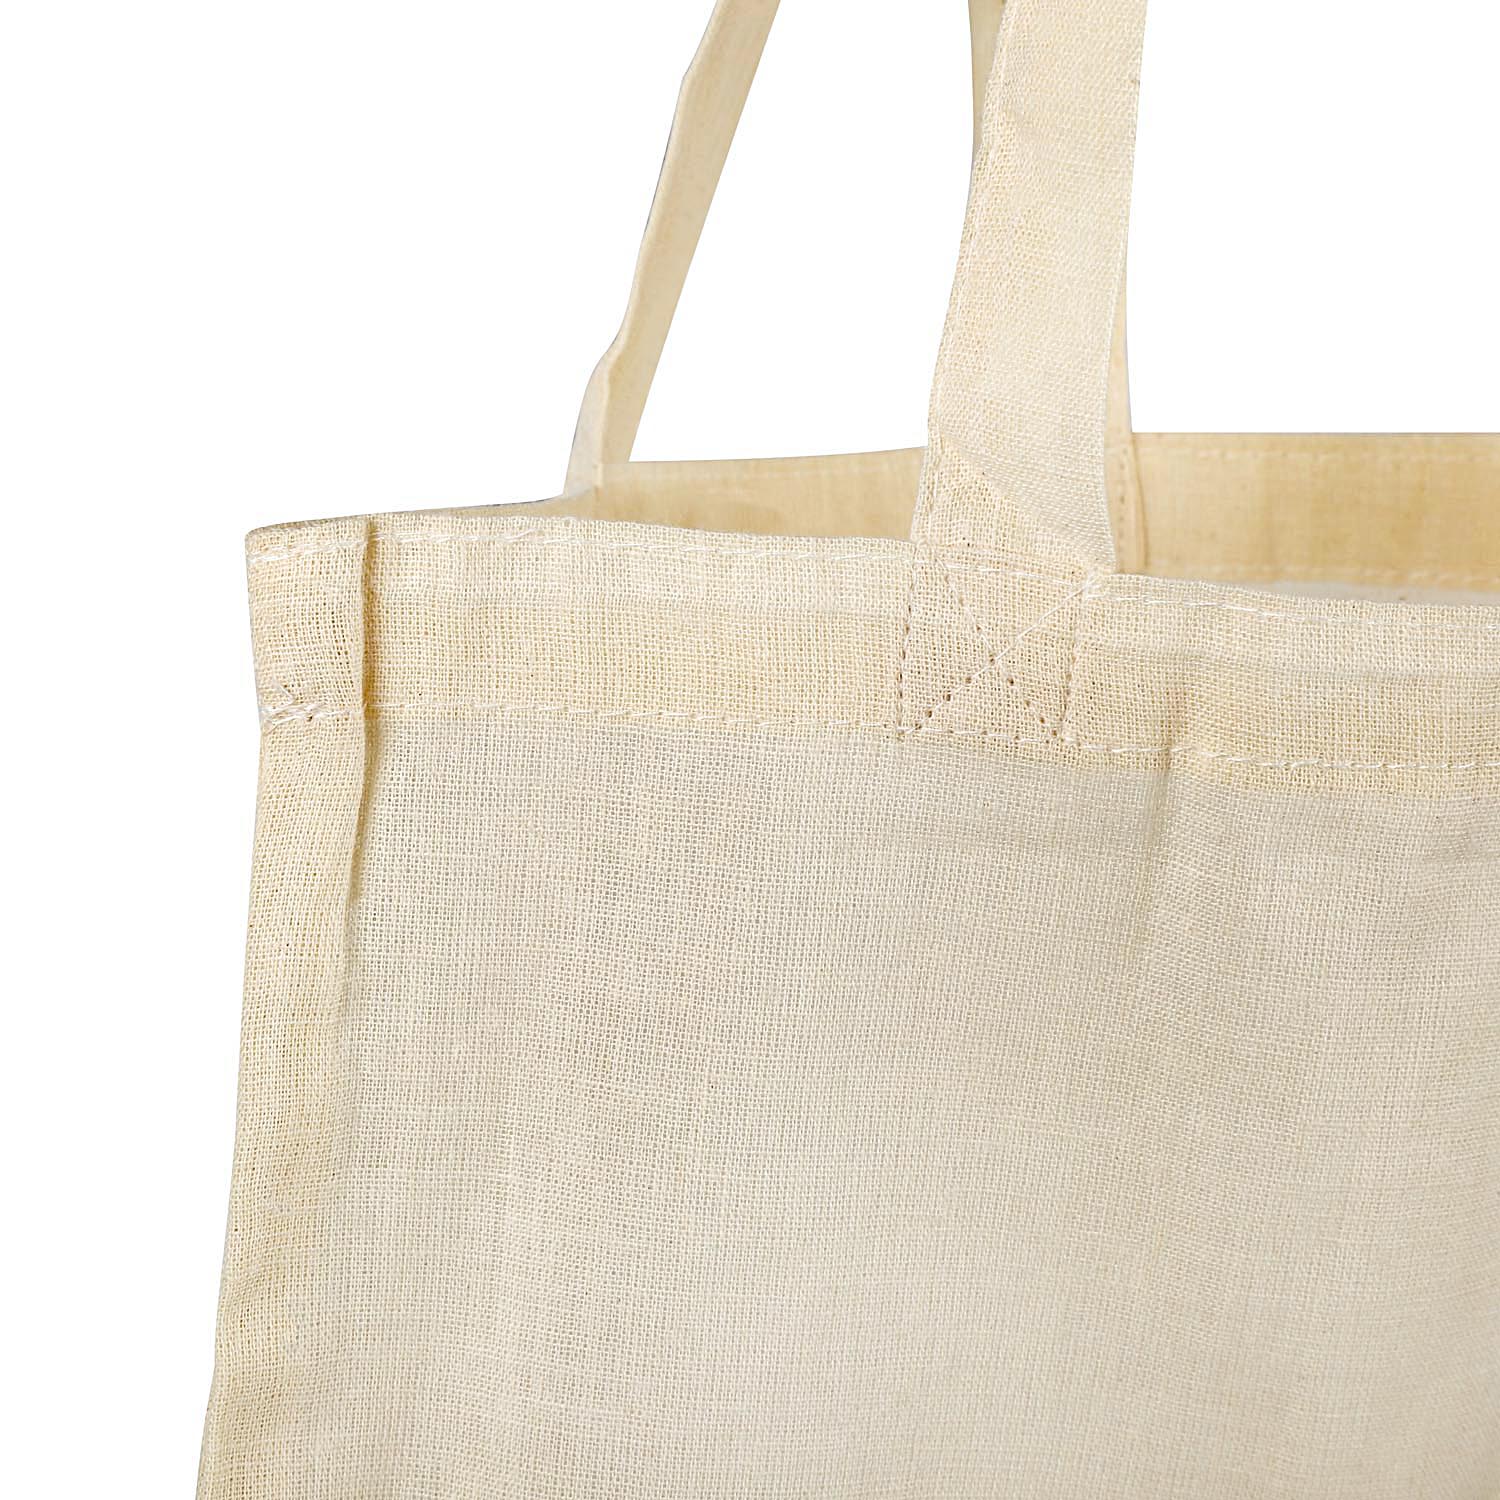 Shoppers Love Oprah's Favorite Leather Tote Bag